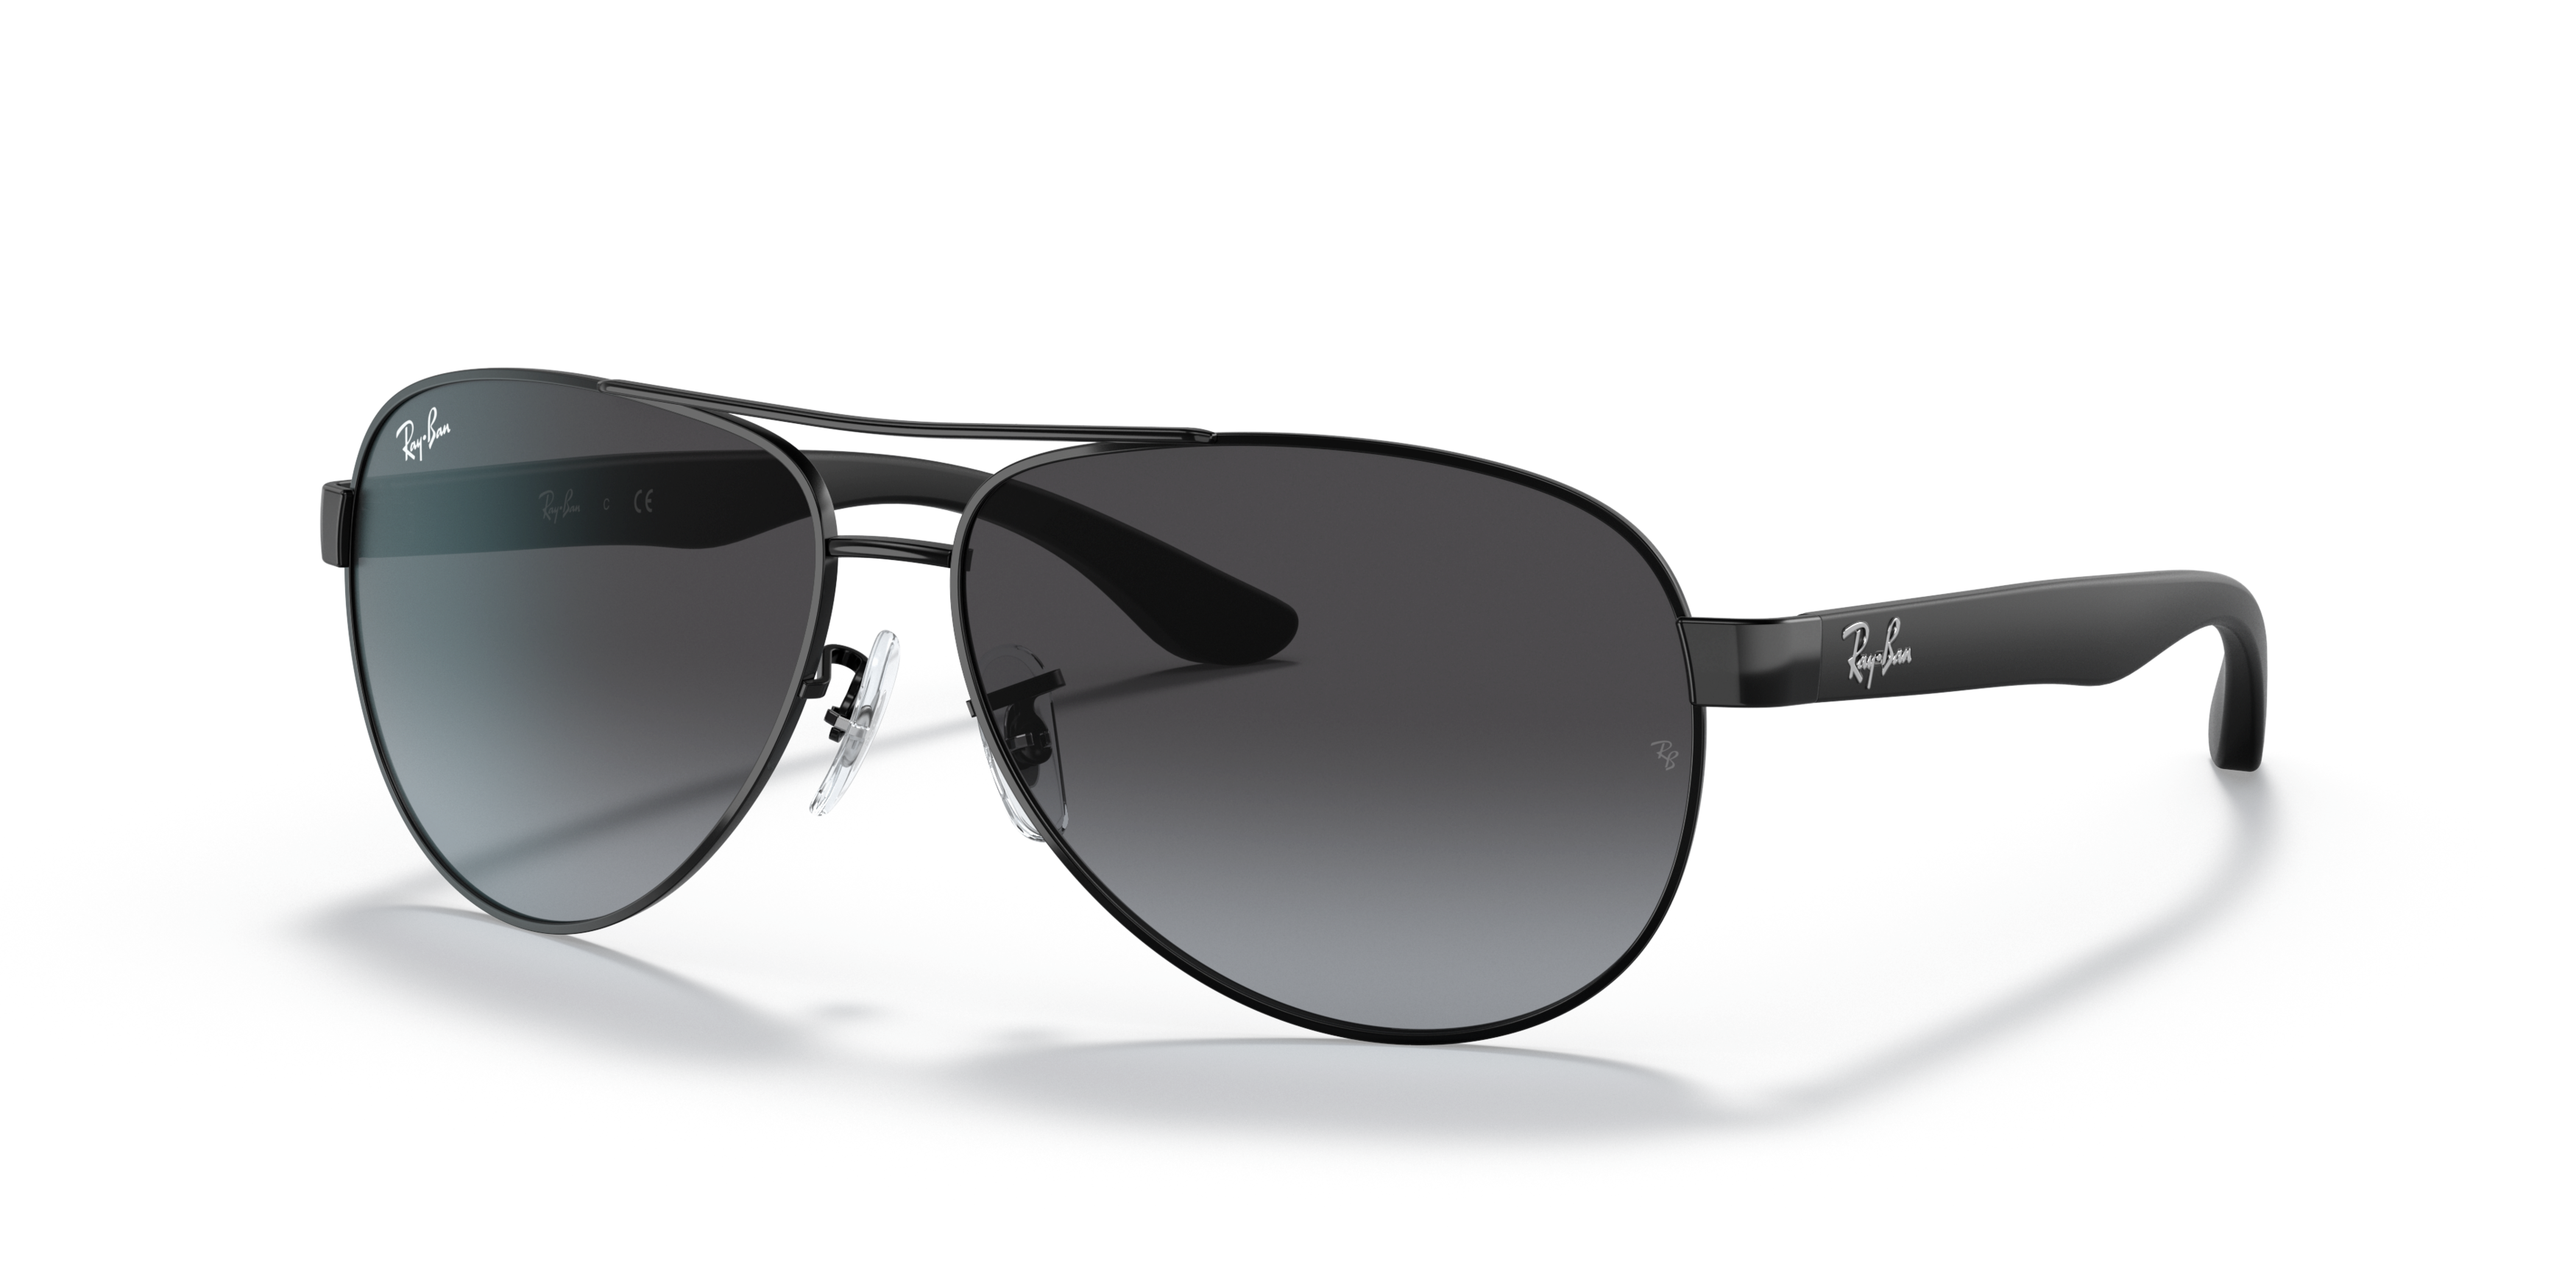 Angle_Left01 Ray-Ban Pilot Limited Edition RB3457 006/8G Grijs / Zwart